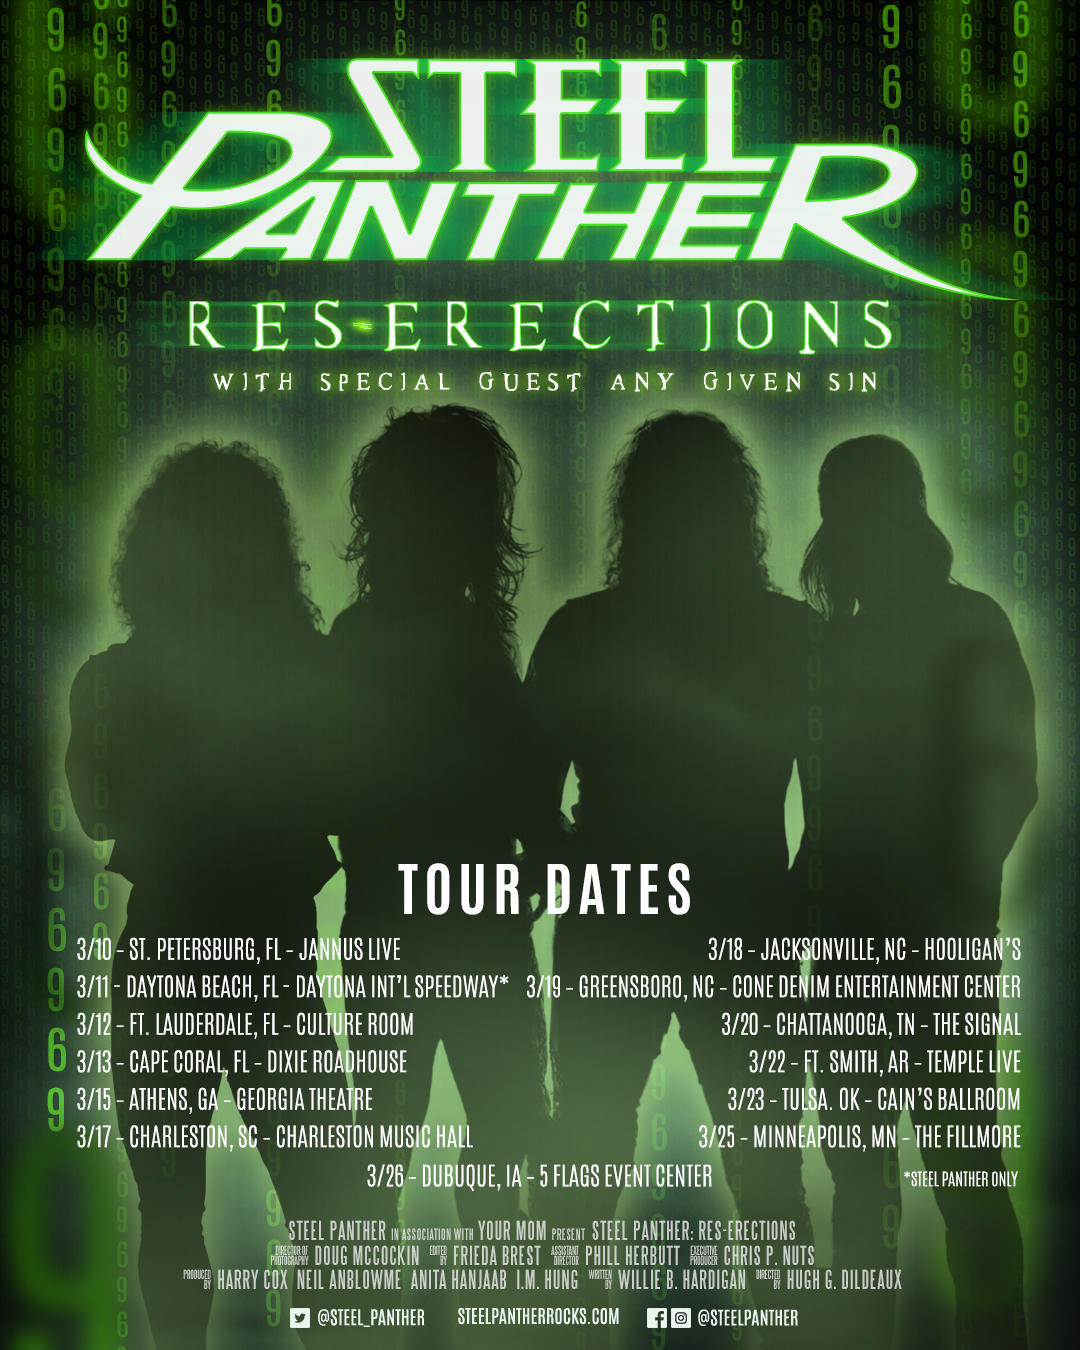 STEEL PANTHER ANNOUNCE THE FIRST LEG OF THEIR 2022 TOUR